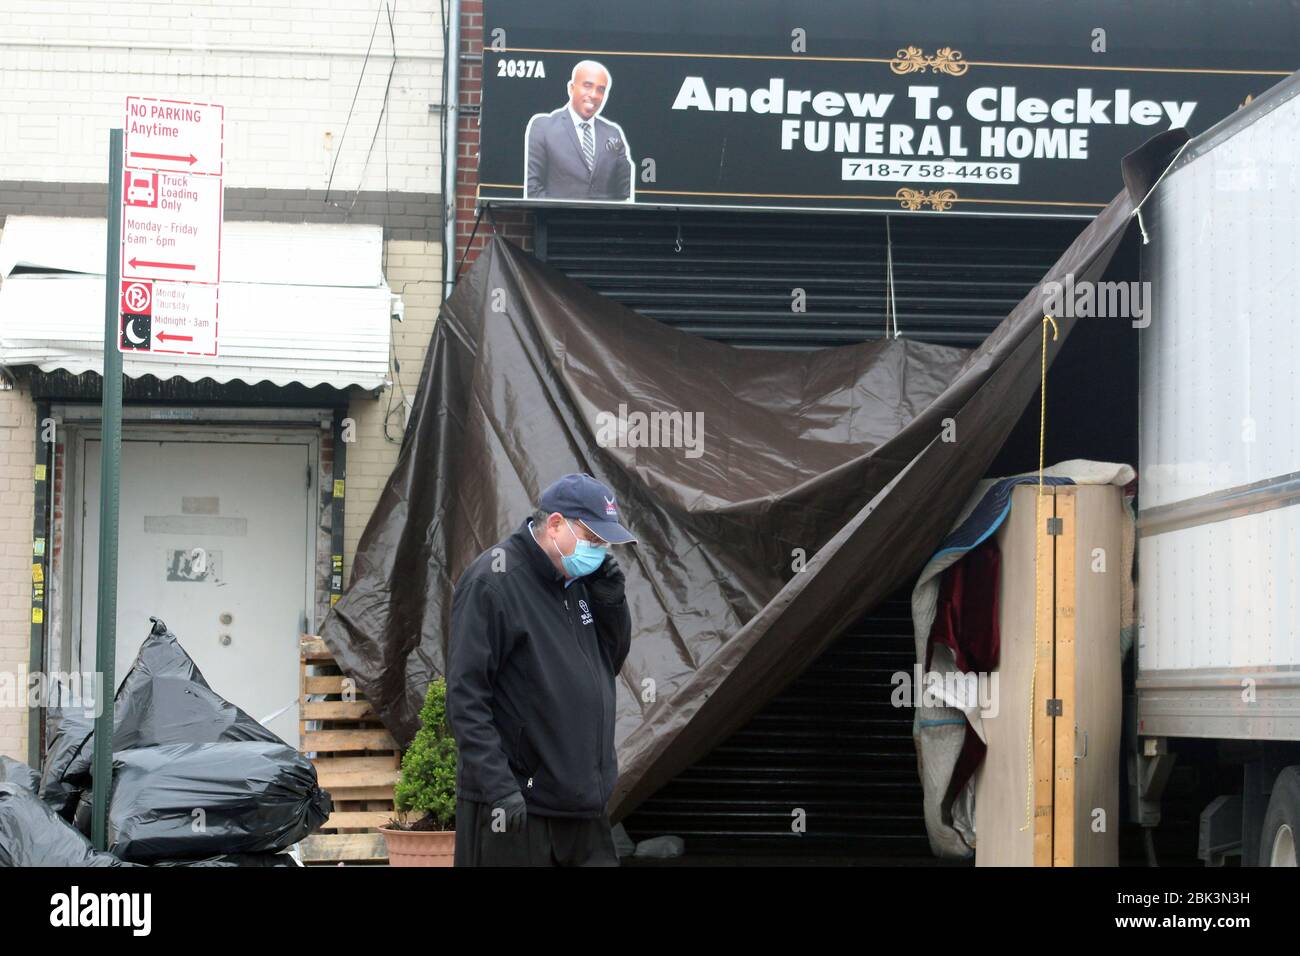 New York, New York, USA. 30th Apr, 2020. This official representing New York City stands on the phone in front of the Andrew T. Cleckley Funeral Home in Brooklyn where bodies non properly cared are removed. 60 corpses were stored in 4 non-refregerated rented trucks lining the street nearby stores. Neighbors reported a foul smell still persistent and fluids dripping from the trucks. Some remains were also found lying on the facilityÃ¢â‚¬â„¢s floor. The funeral home was overwhelmed by COVID-19 deaths. Credit: Marie Le Ble/ZUMA Wire/Alamy Live News Stock Photo